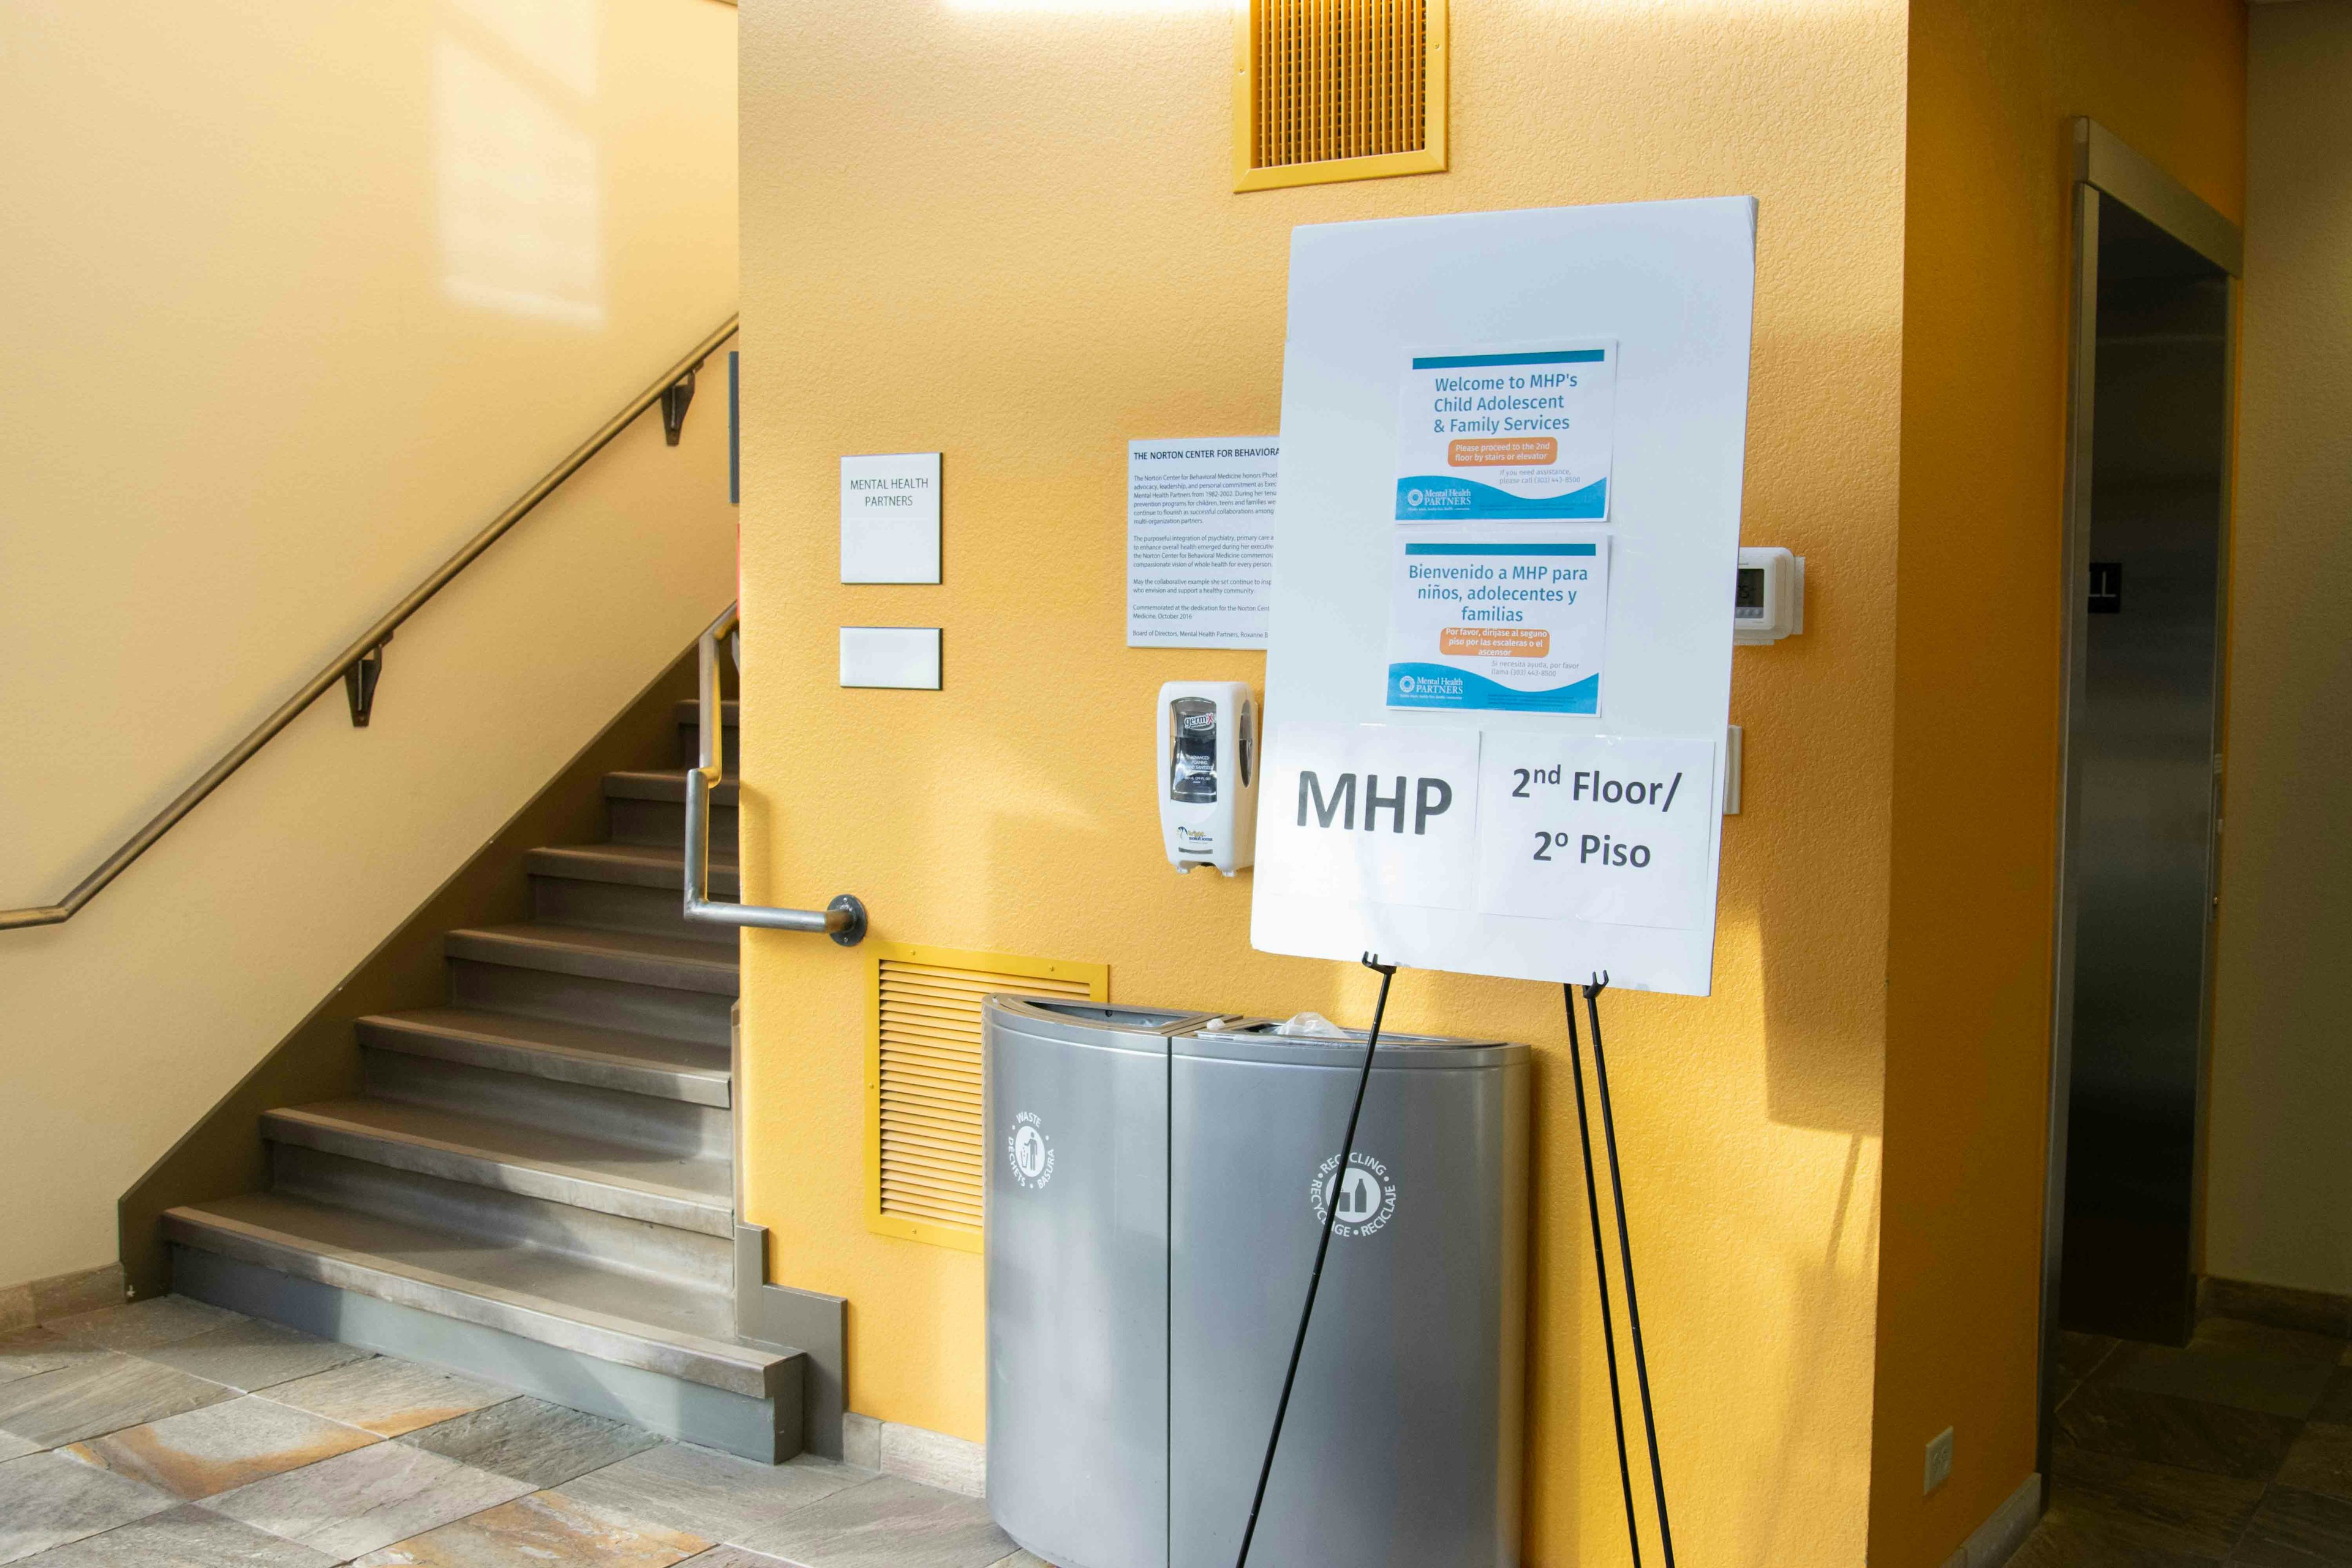 Entryway to Norton building. Bright yellow walls, sign that reads: MHP 2nd floor/2 Piso, and a staircase leading up to the second floor.